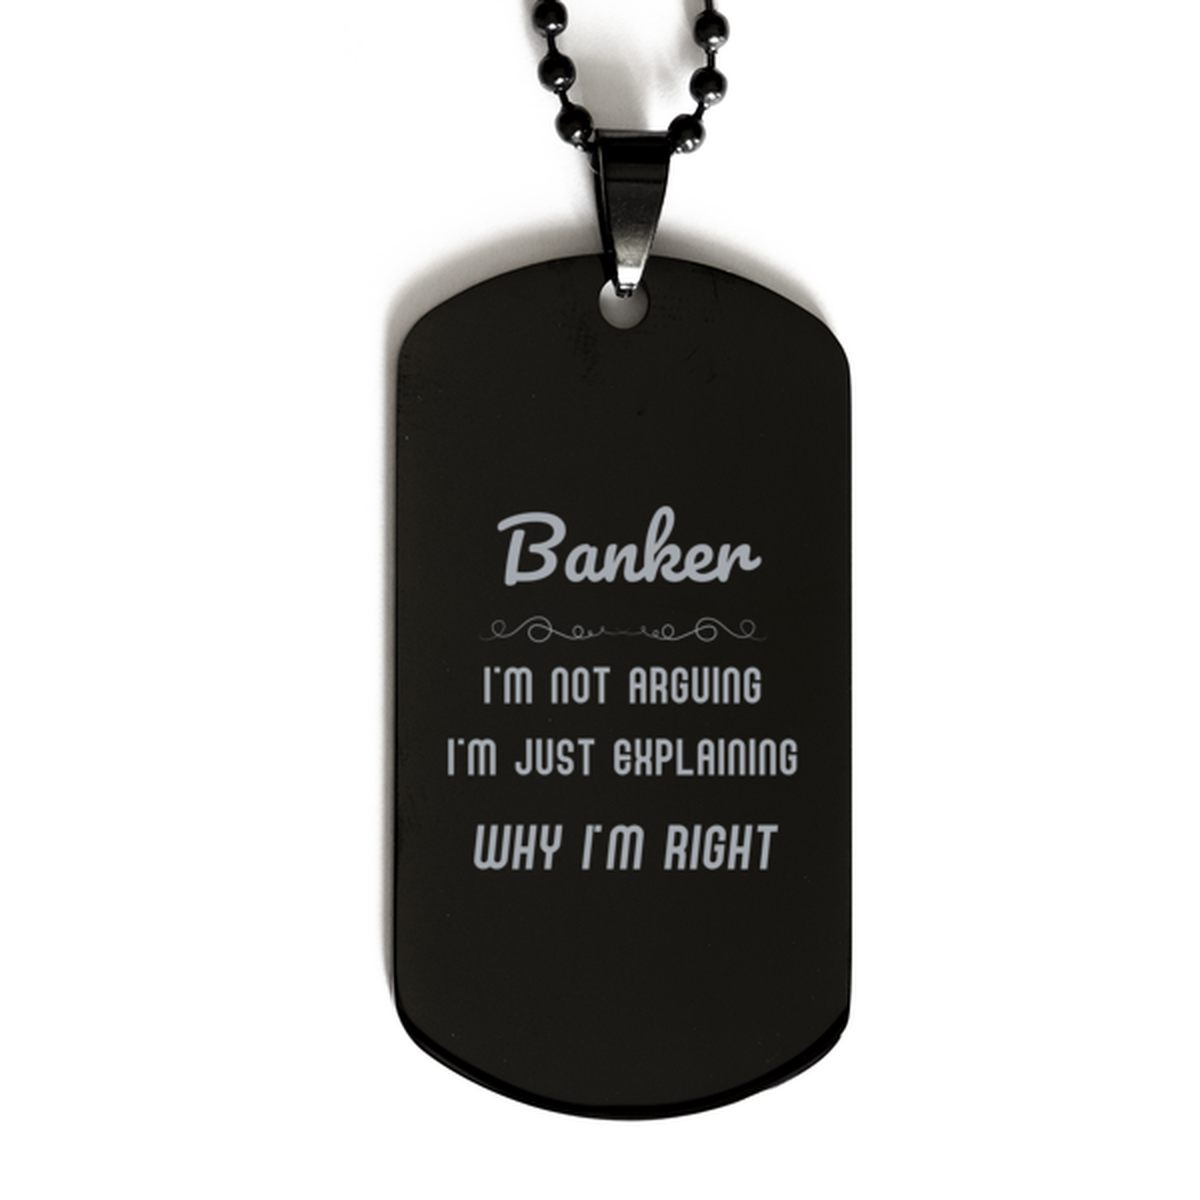 Banker I'm not Arguing. I'm Just Explaining Why I'm RIGHT Black Dog Tag, Funny Saying Quote Banker Gifts For Banker Graduation Birthday Christmas Gifts for Men Women Coworker